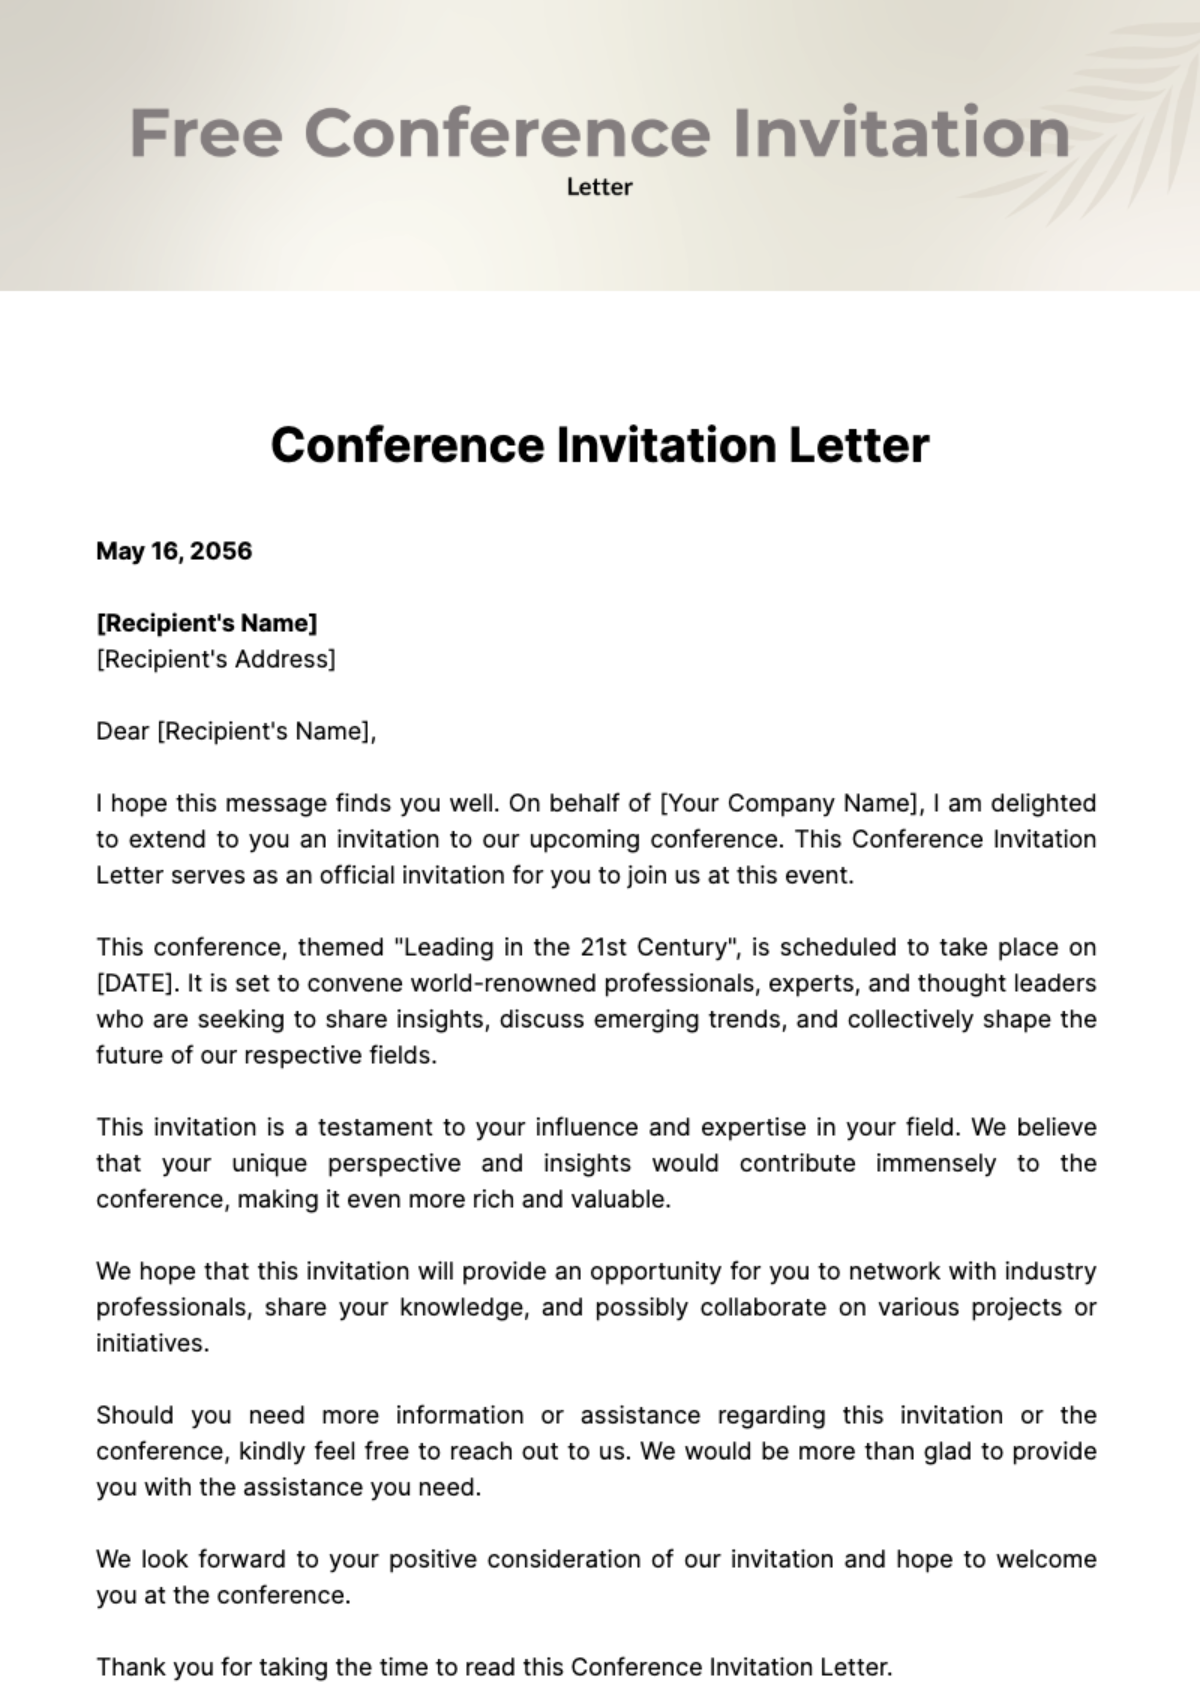 Free Conference Invitation Letter Template